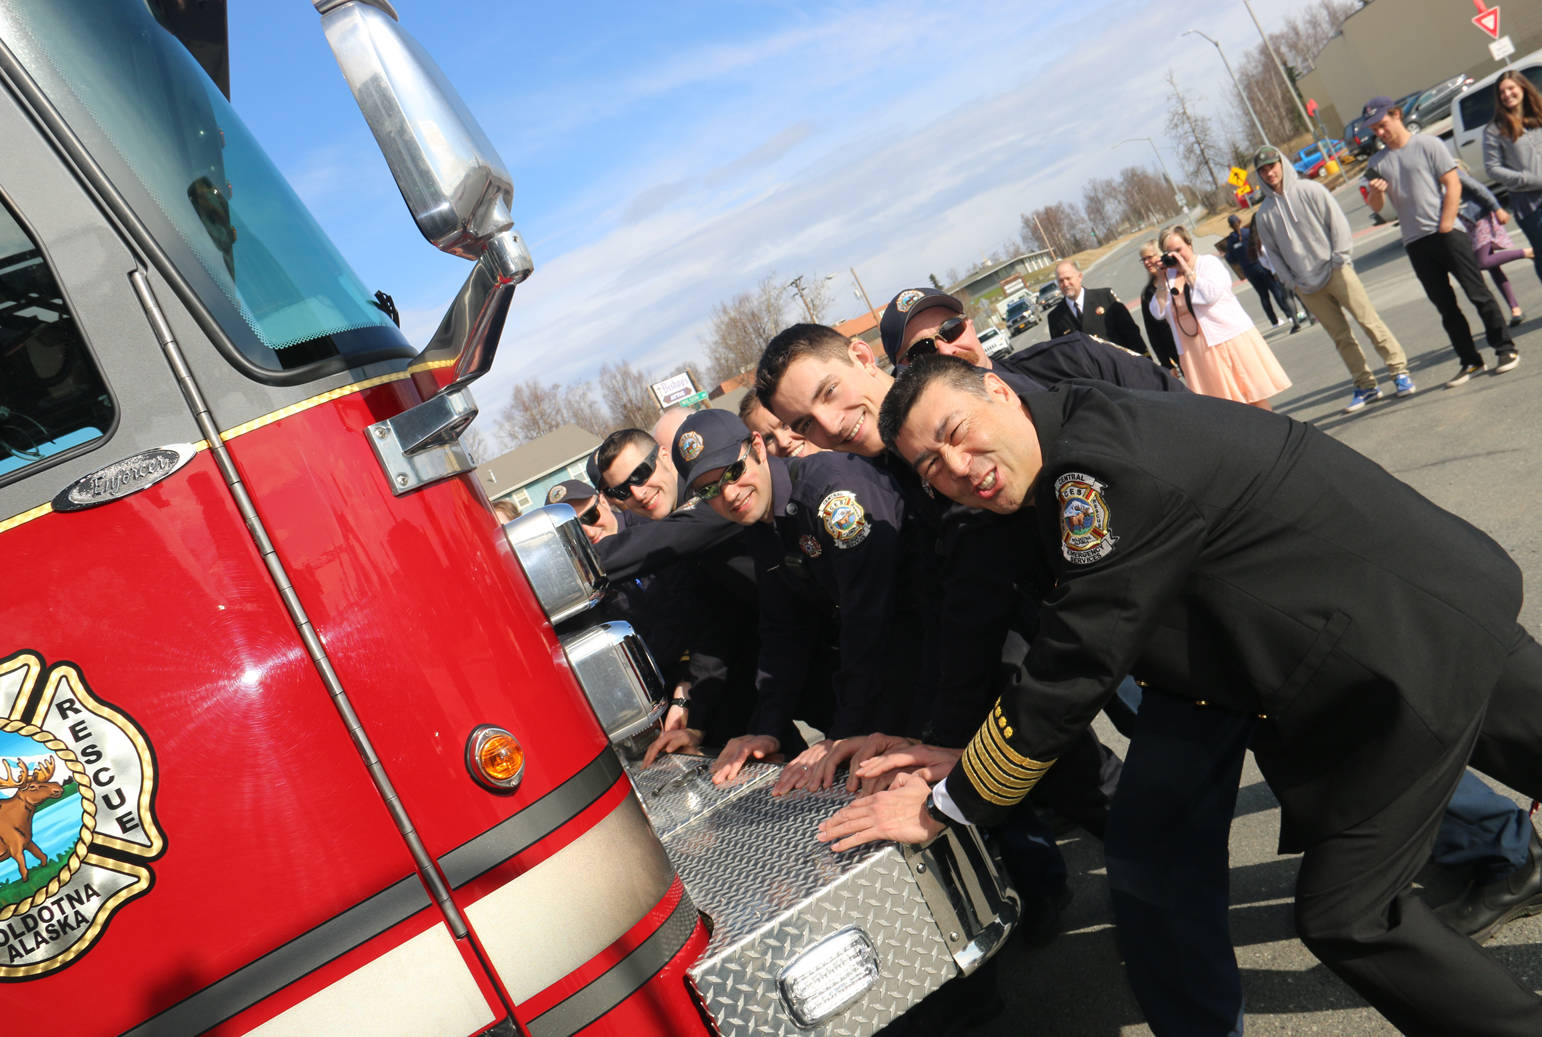 Chief Browning and first responders push a new ladder truck into its bay to officially dedicate it to service.